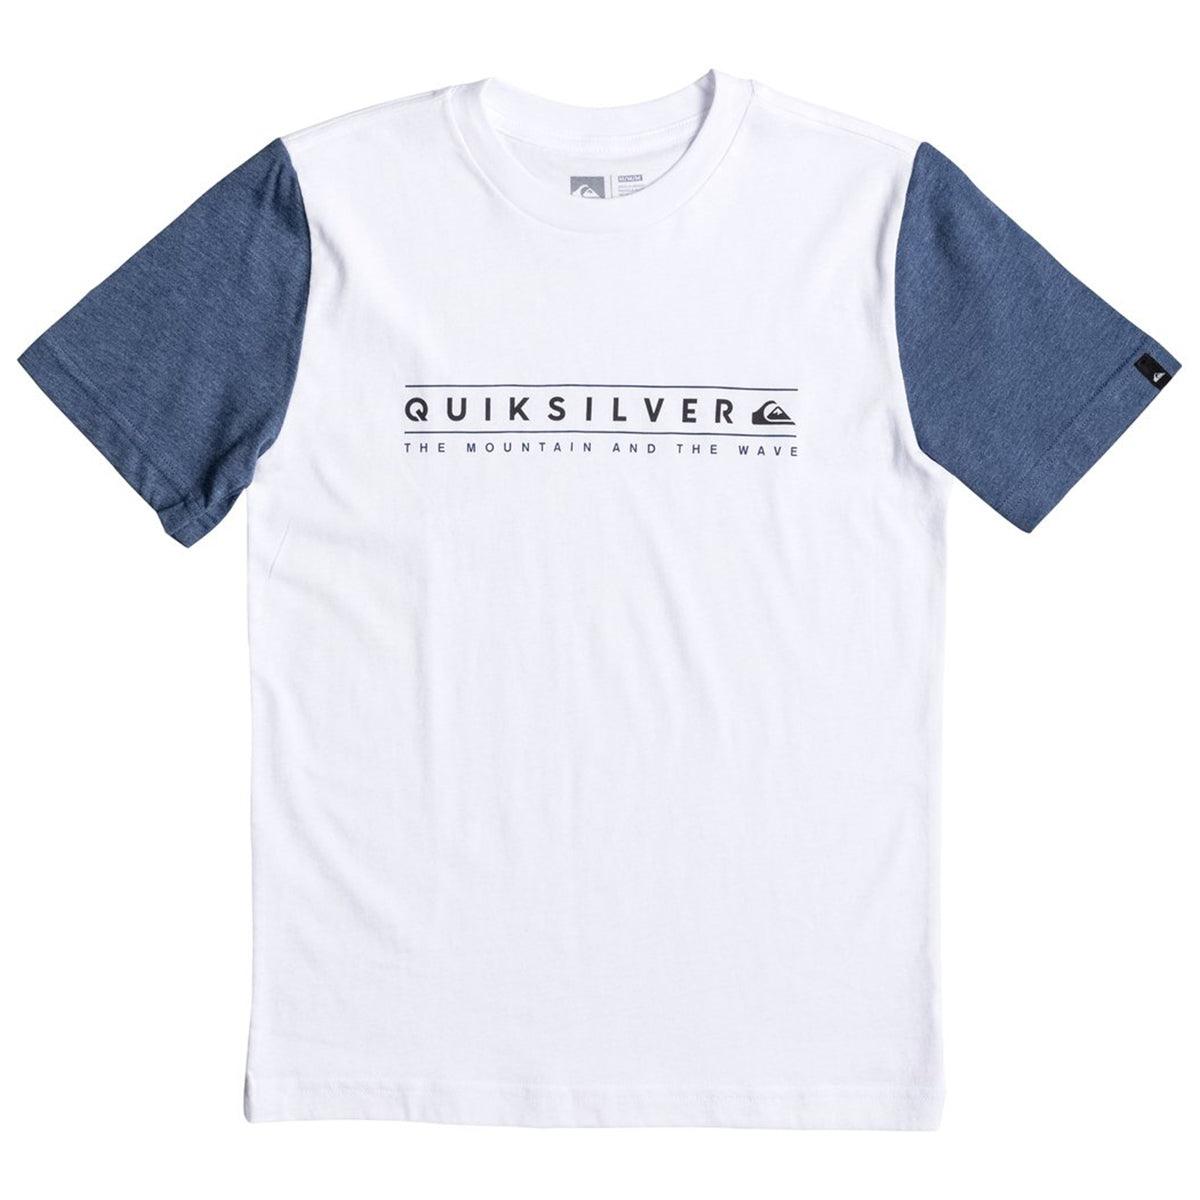 Quiksilver Clean Ways Youth Boys Short-Sleeve Shirts - White